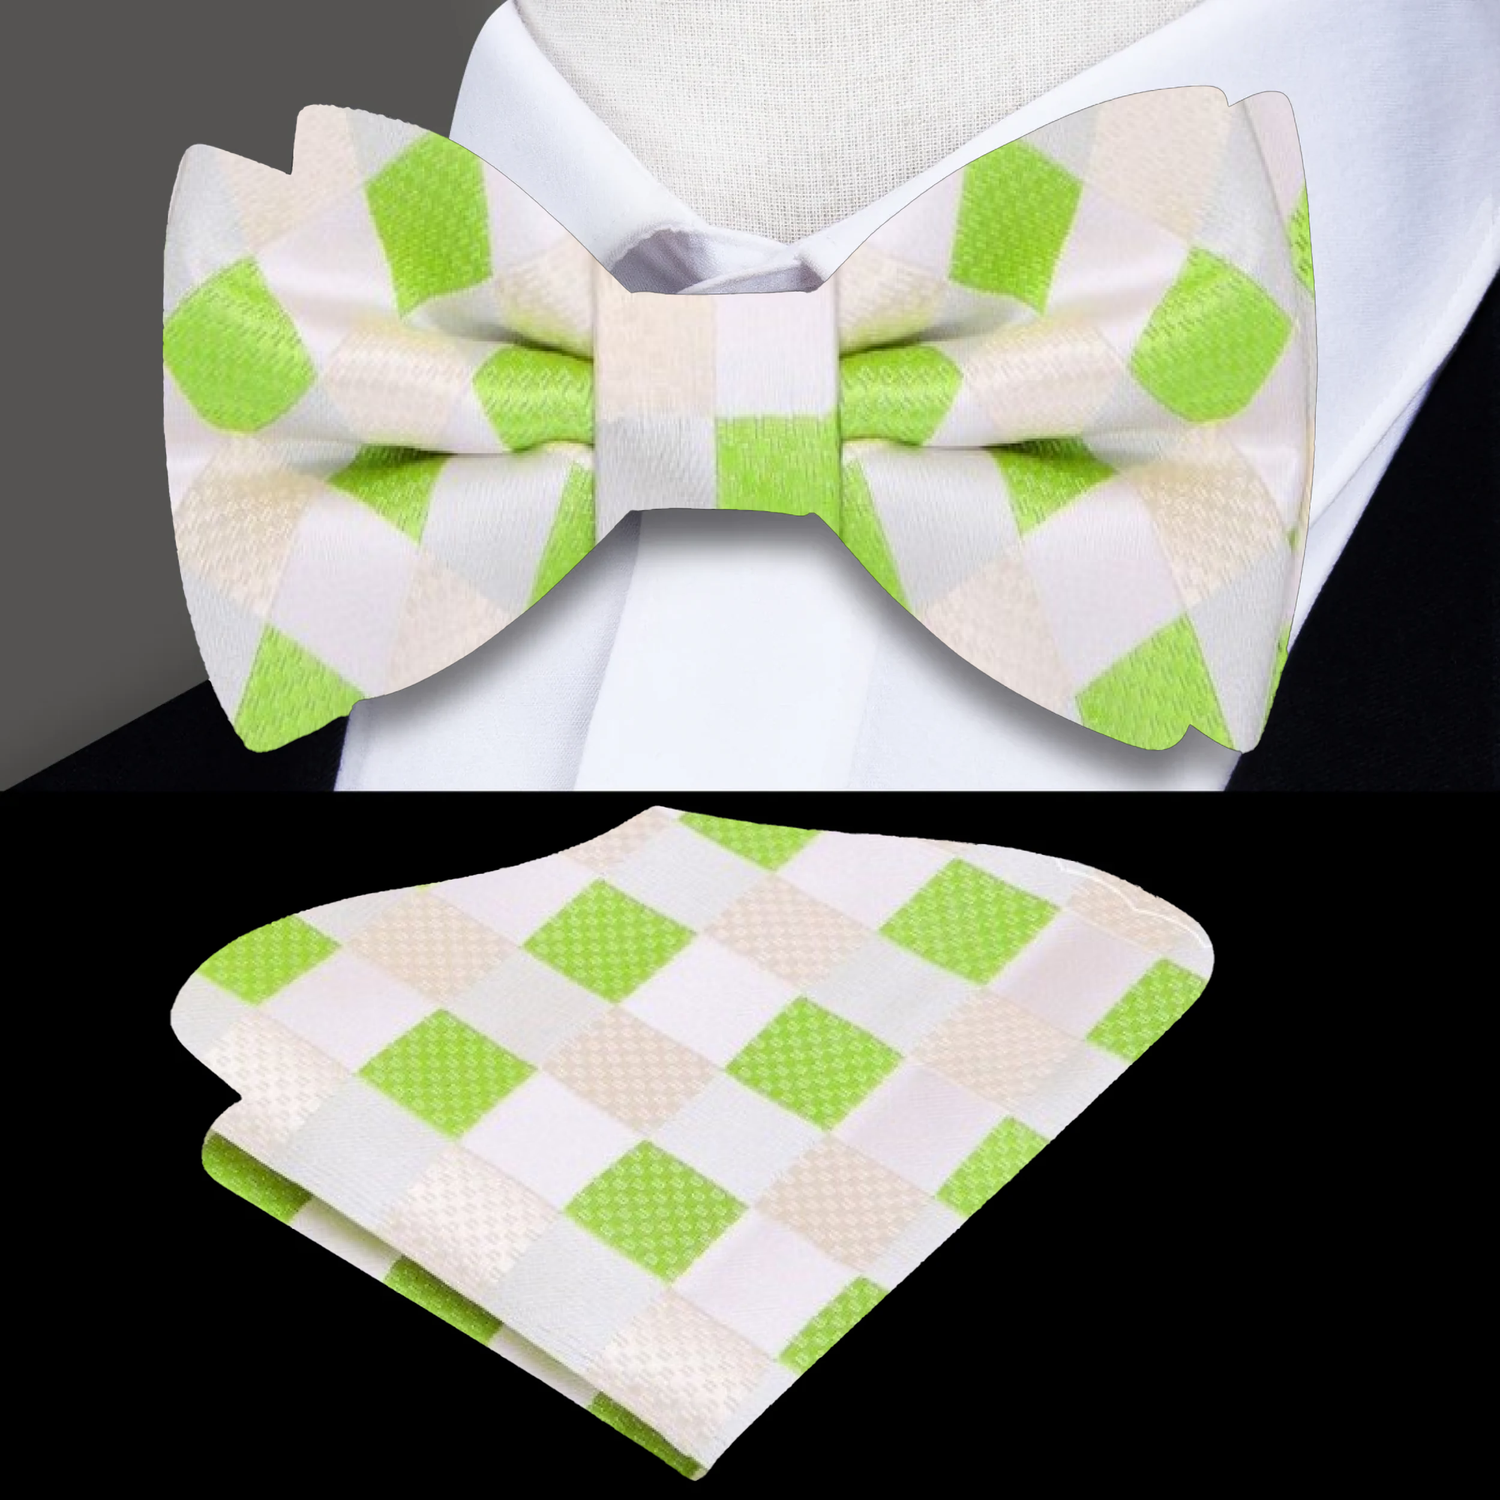 A Lime, Yellow Geometric Pattern Silk Bow Tie, Matching Pocket Square